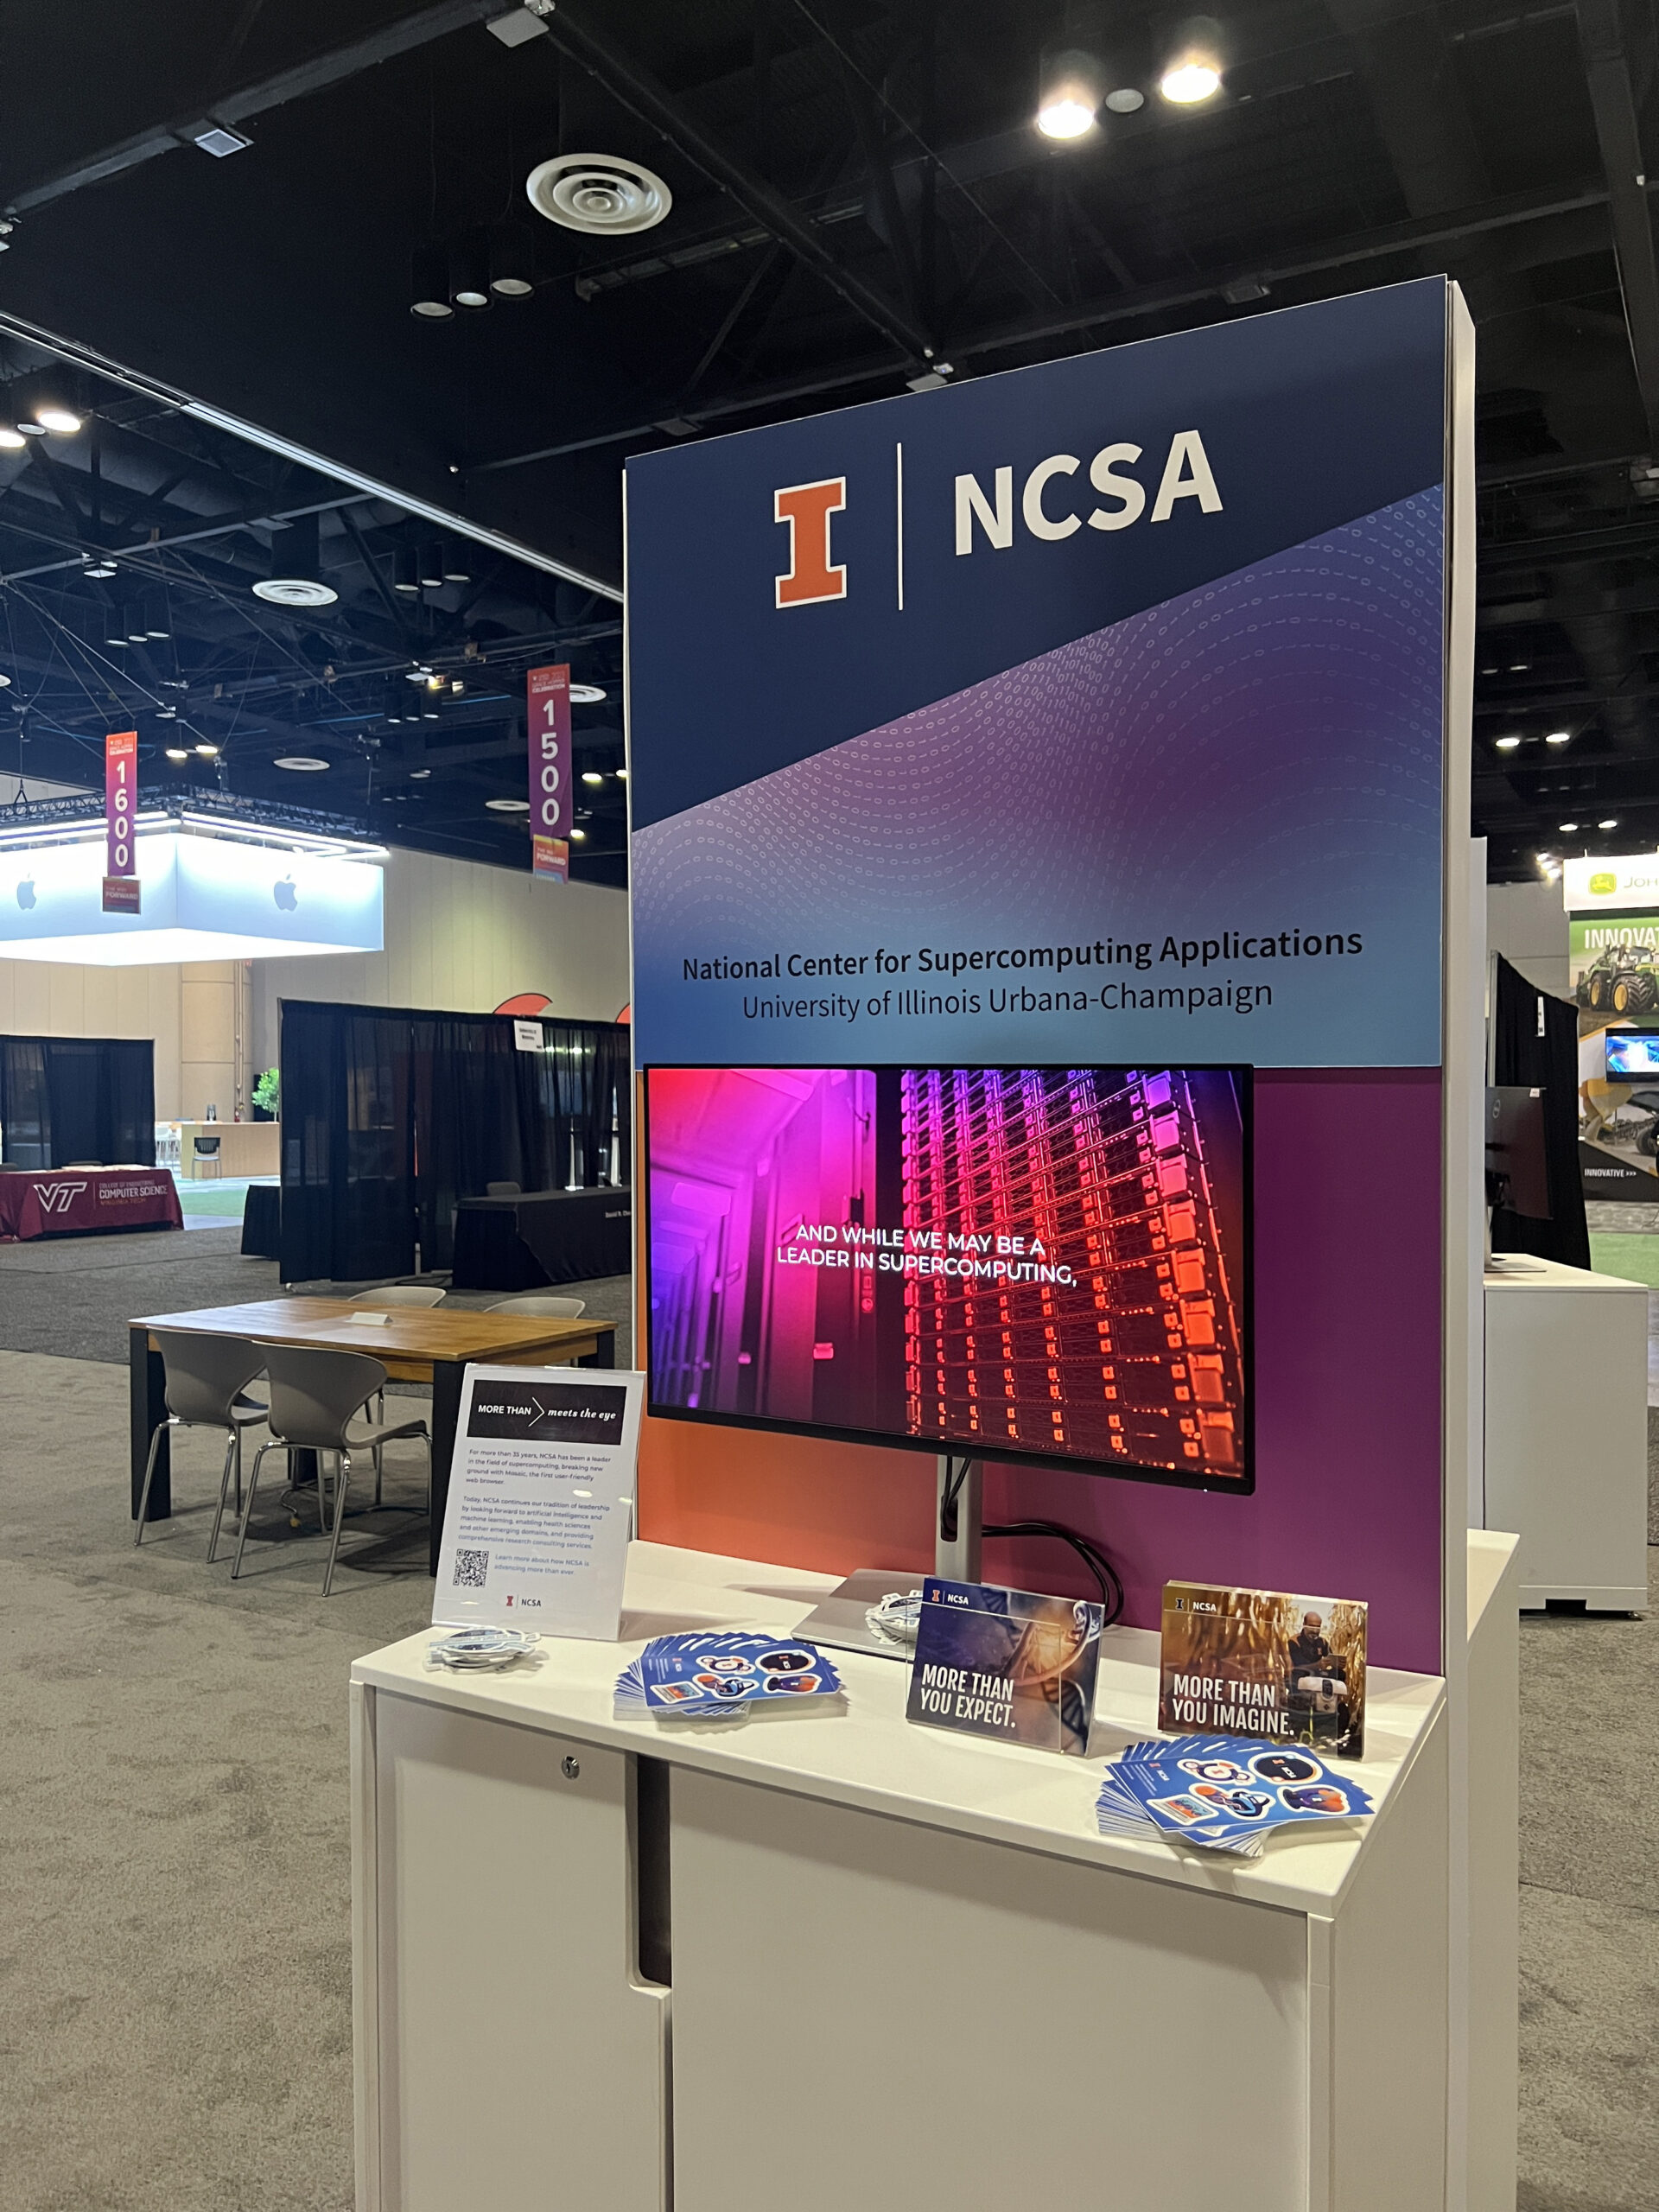 NCSA had a mini booth at Grace hopper. This picture shows the mini booth, with some stickers and handouts for visitors.